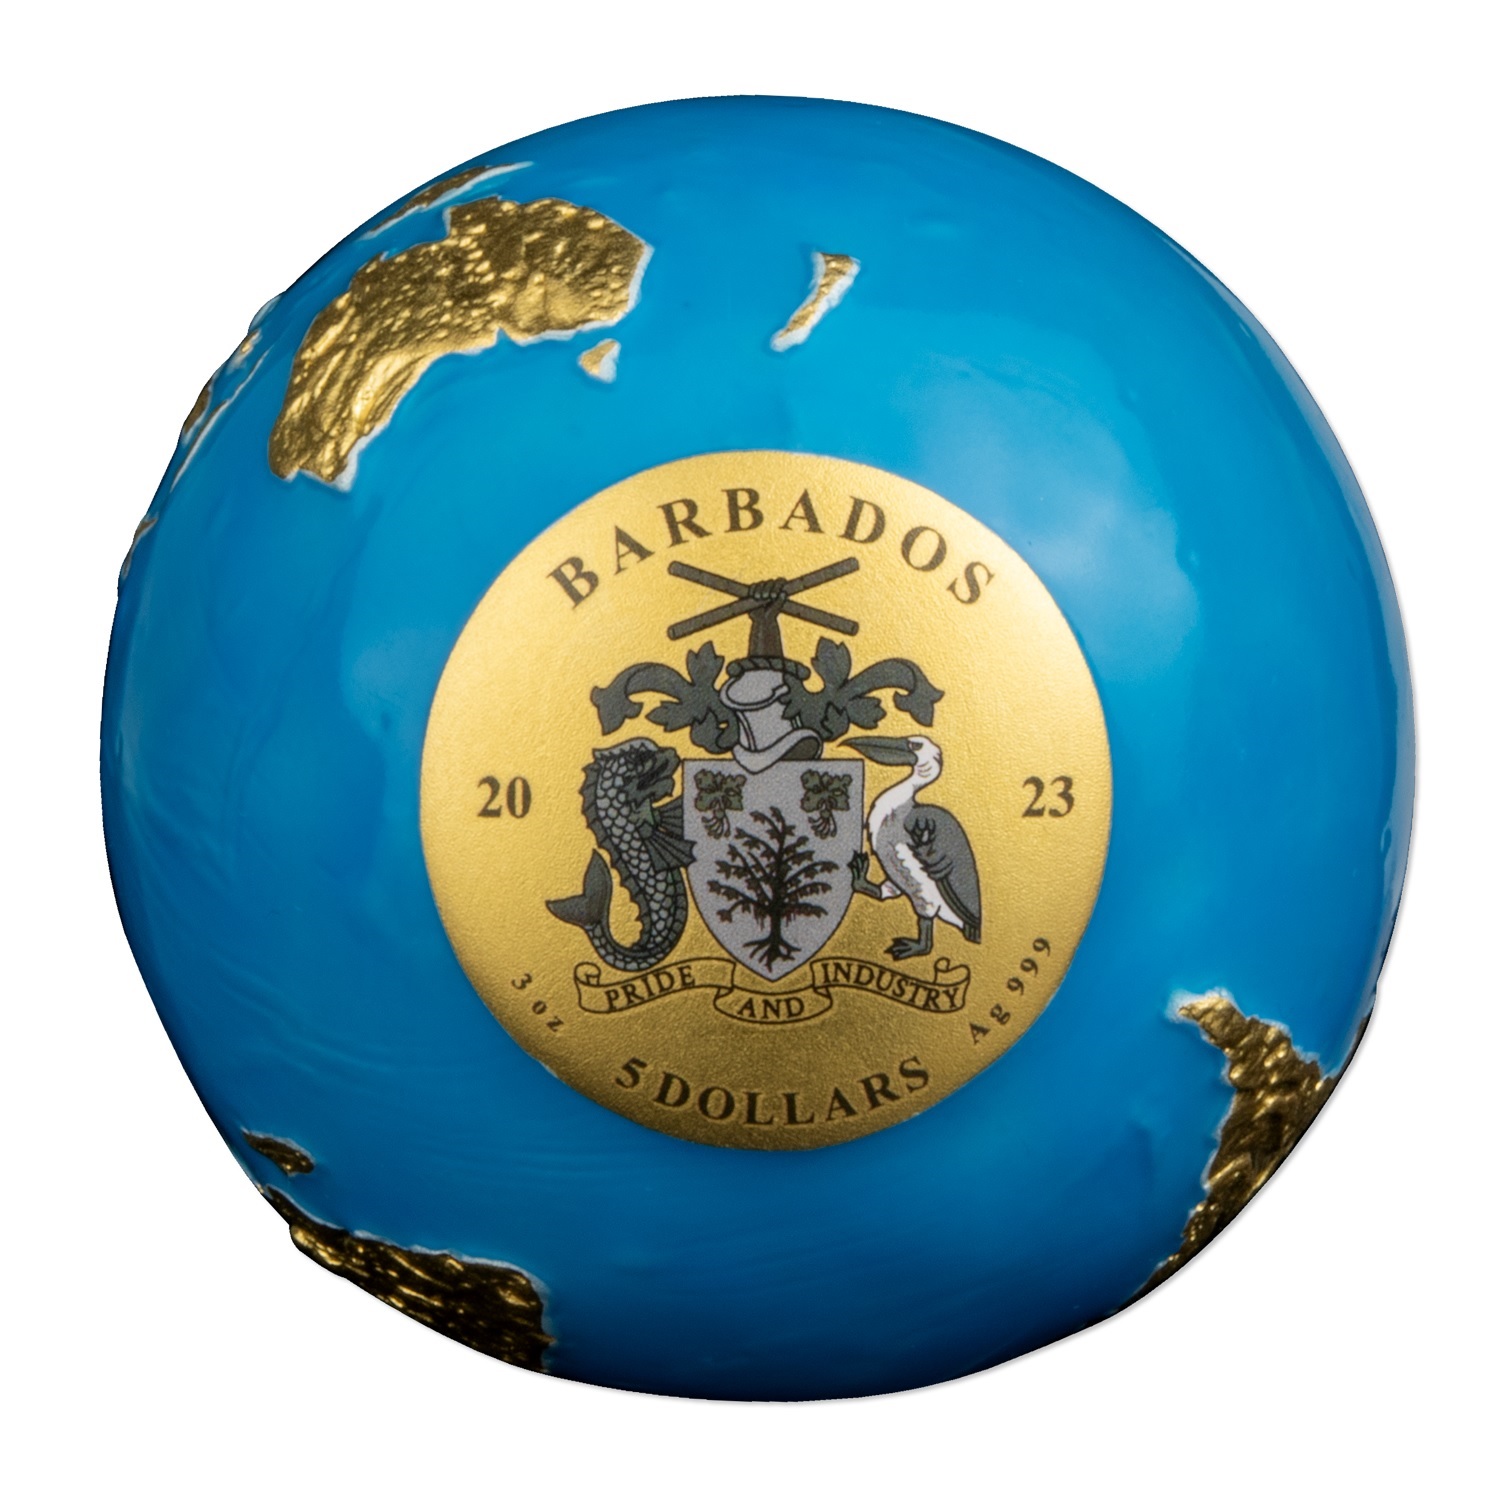 (W022.5.D.2023.3.oz.Ag.8) 5 Dollars Barbados 2023 3 oz BU silver - Glow-in-the-dark Blue Marble (gilded) (face value) (zoom)